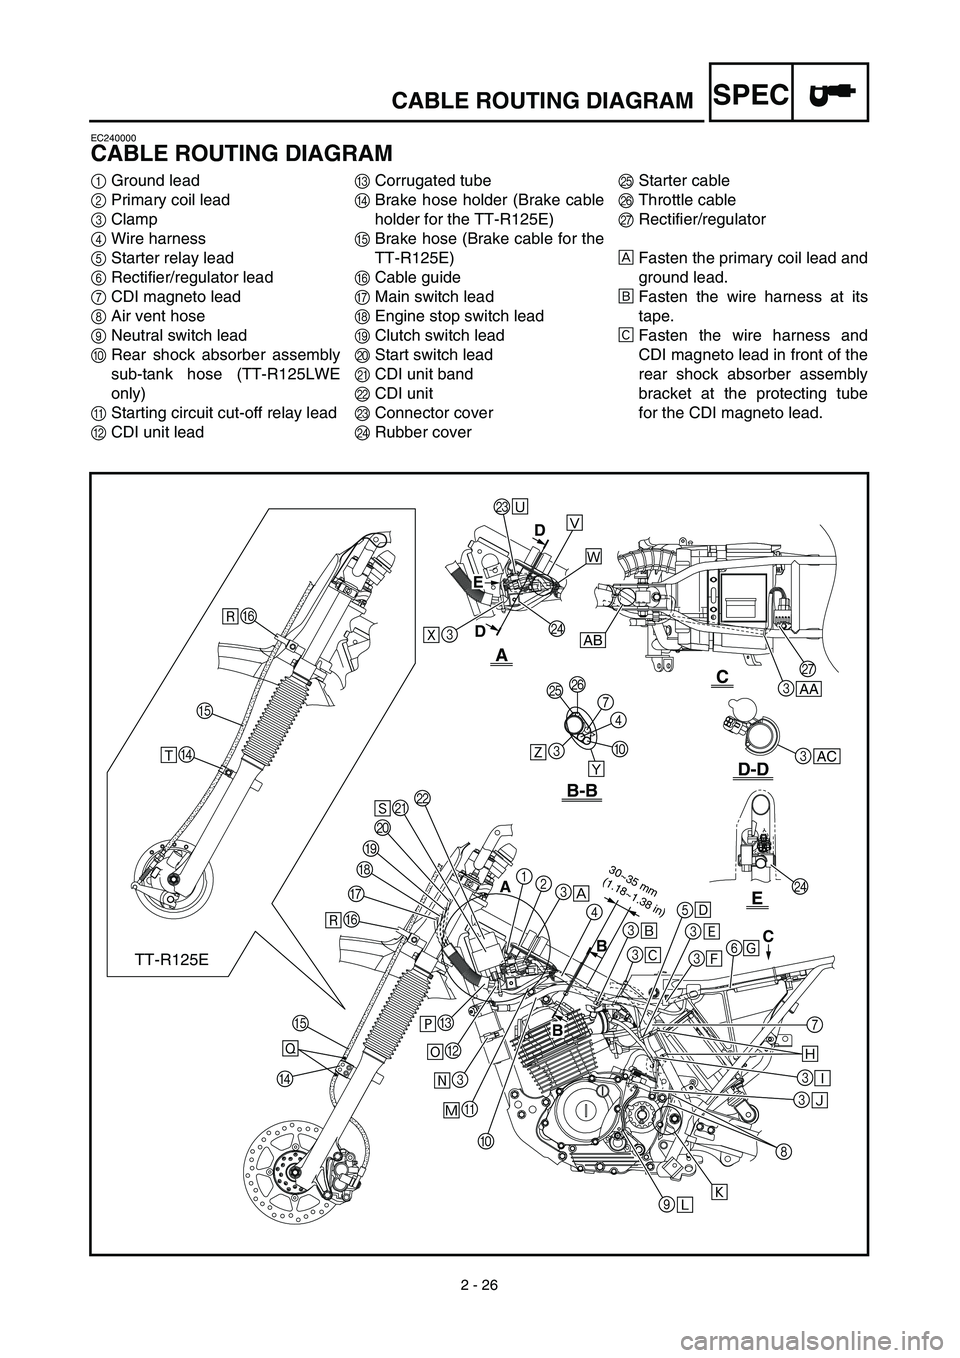 YAMAHA TTR125 2003  Owners Manual  
2 - 26
SPEC
 
CABLE ROUTING DIAGRAM 
EC240000 
CABLE ROUTING DIAGRAM 
1 
Ground lead 
2 
Primary coil lead 
3 
Clamp 
4 
Wire harness 
5 
Starter relay lead 
6 
Rectifier/regulator lead 
7 
CDI magn